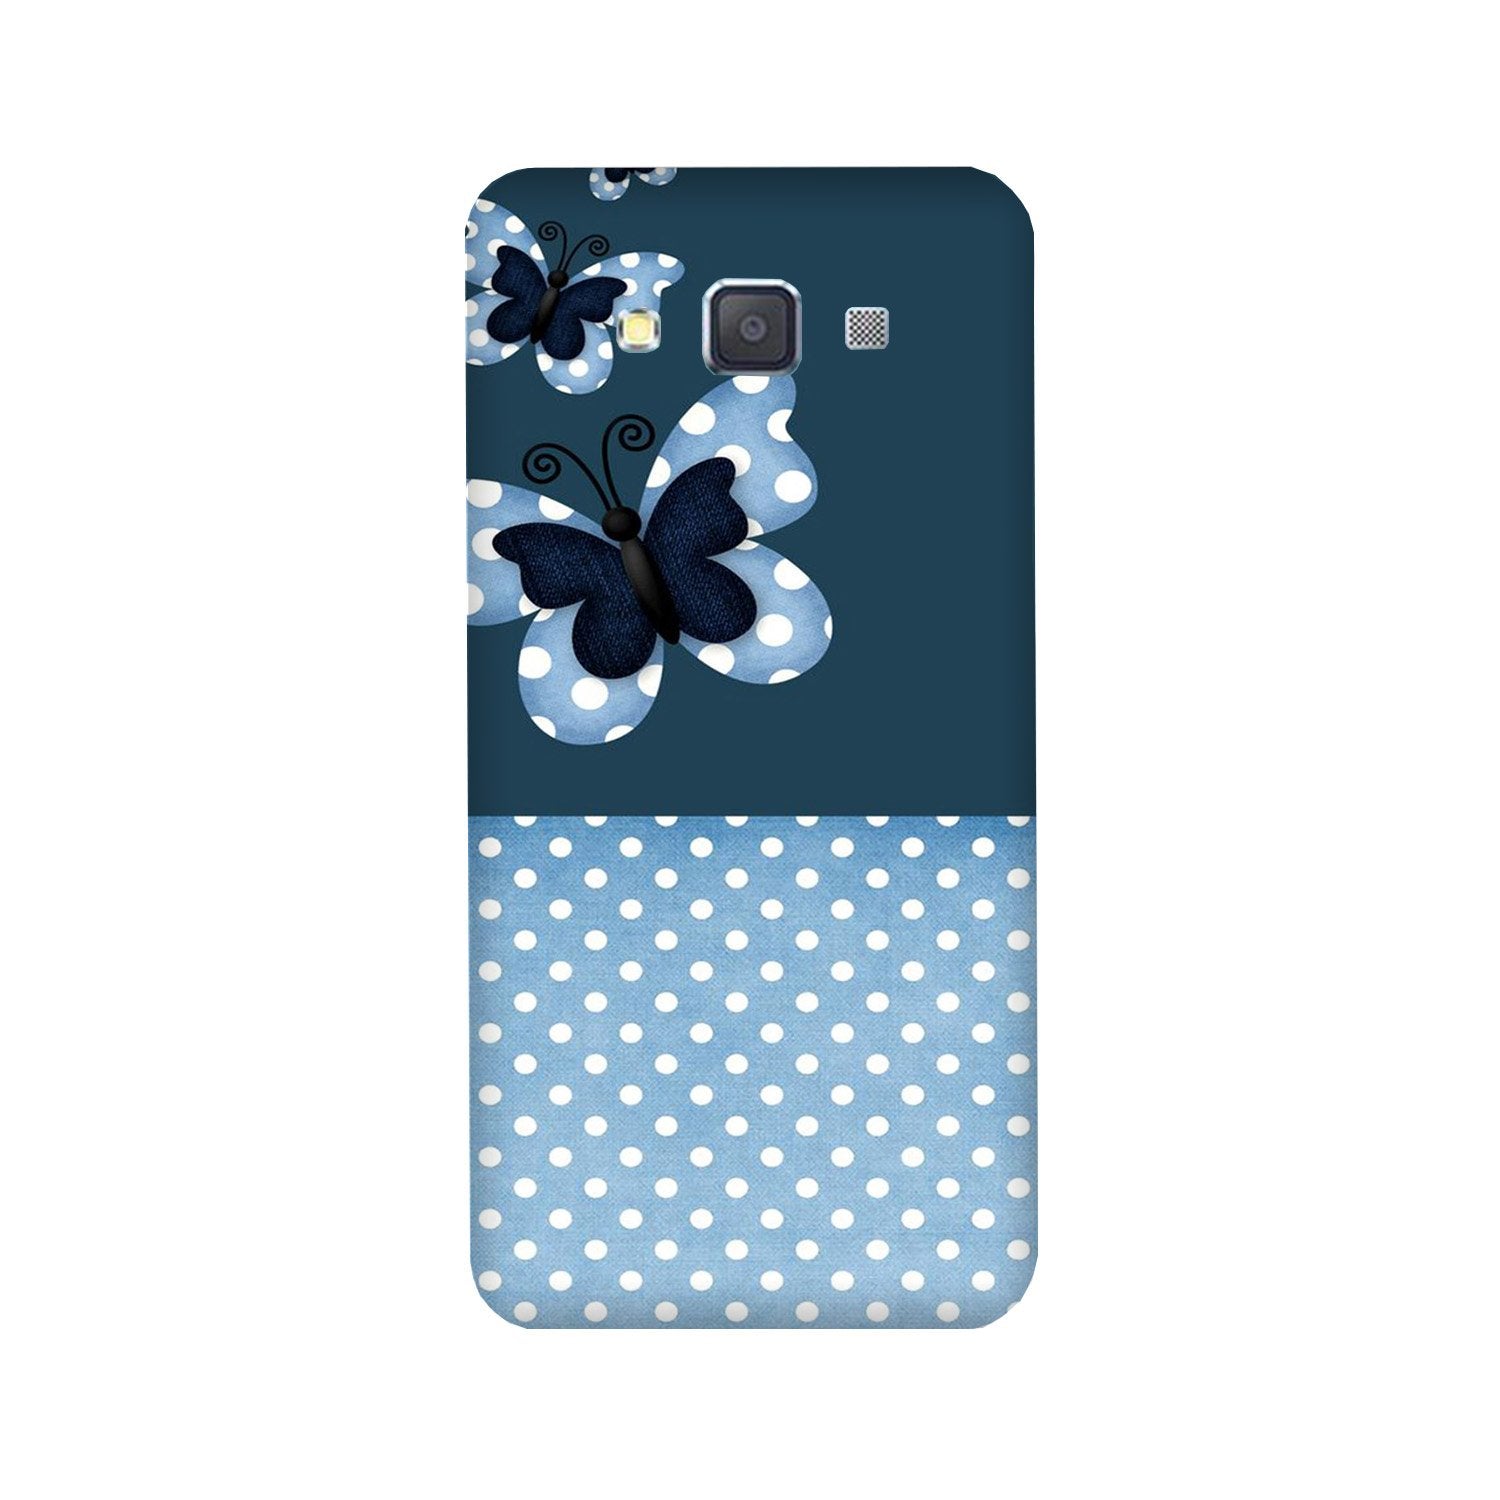 White dots Butterfly Case for Galaxy J5 (2016)